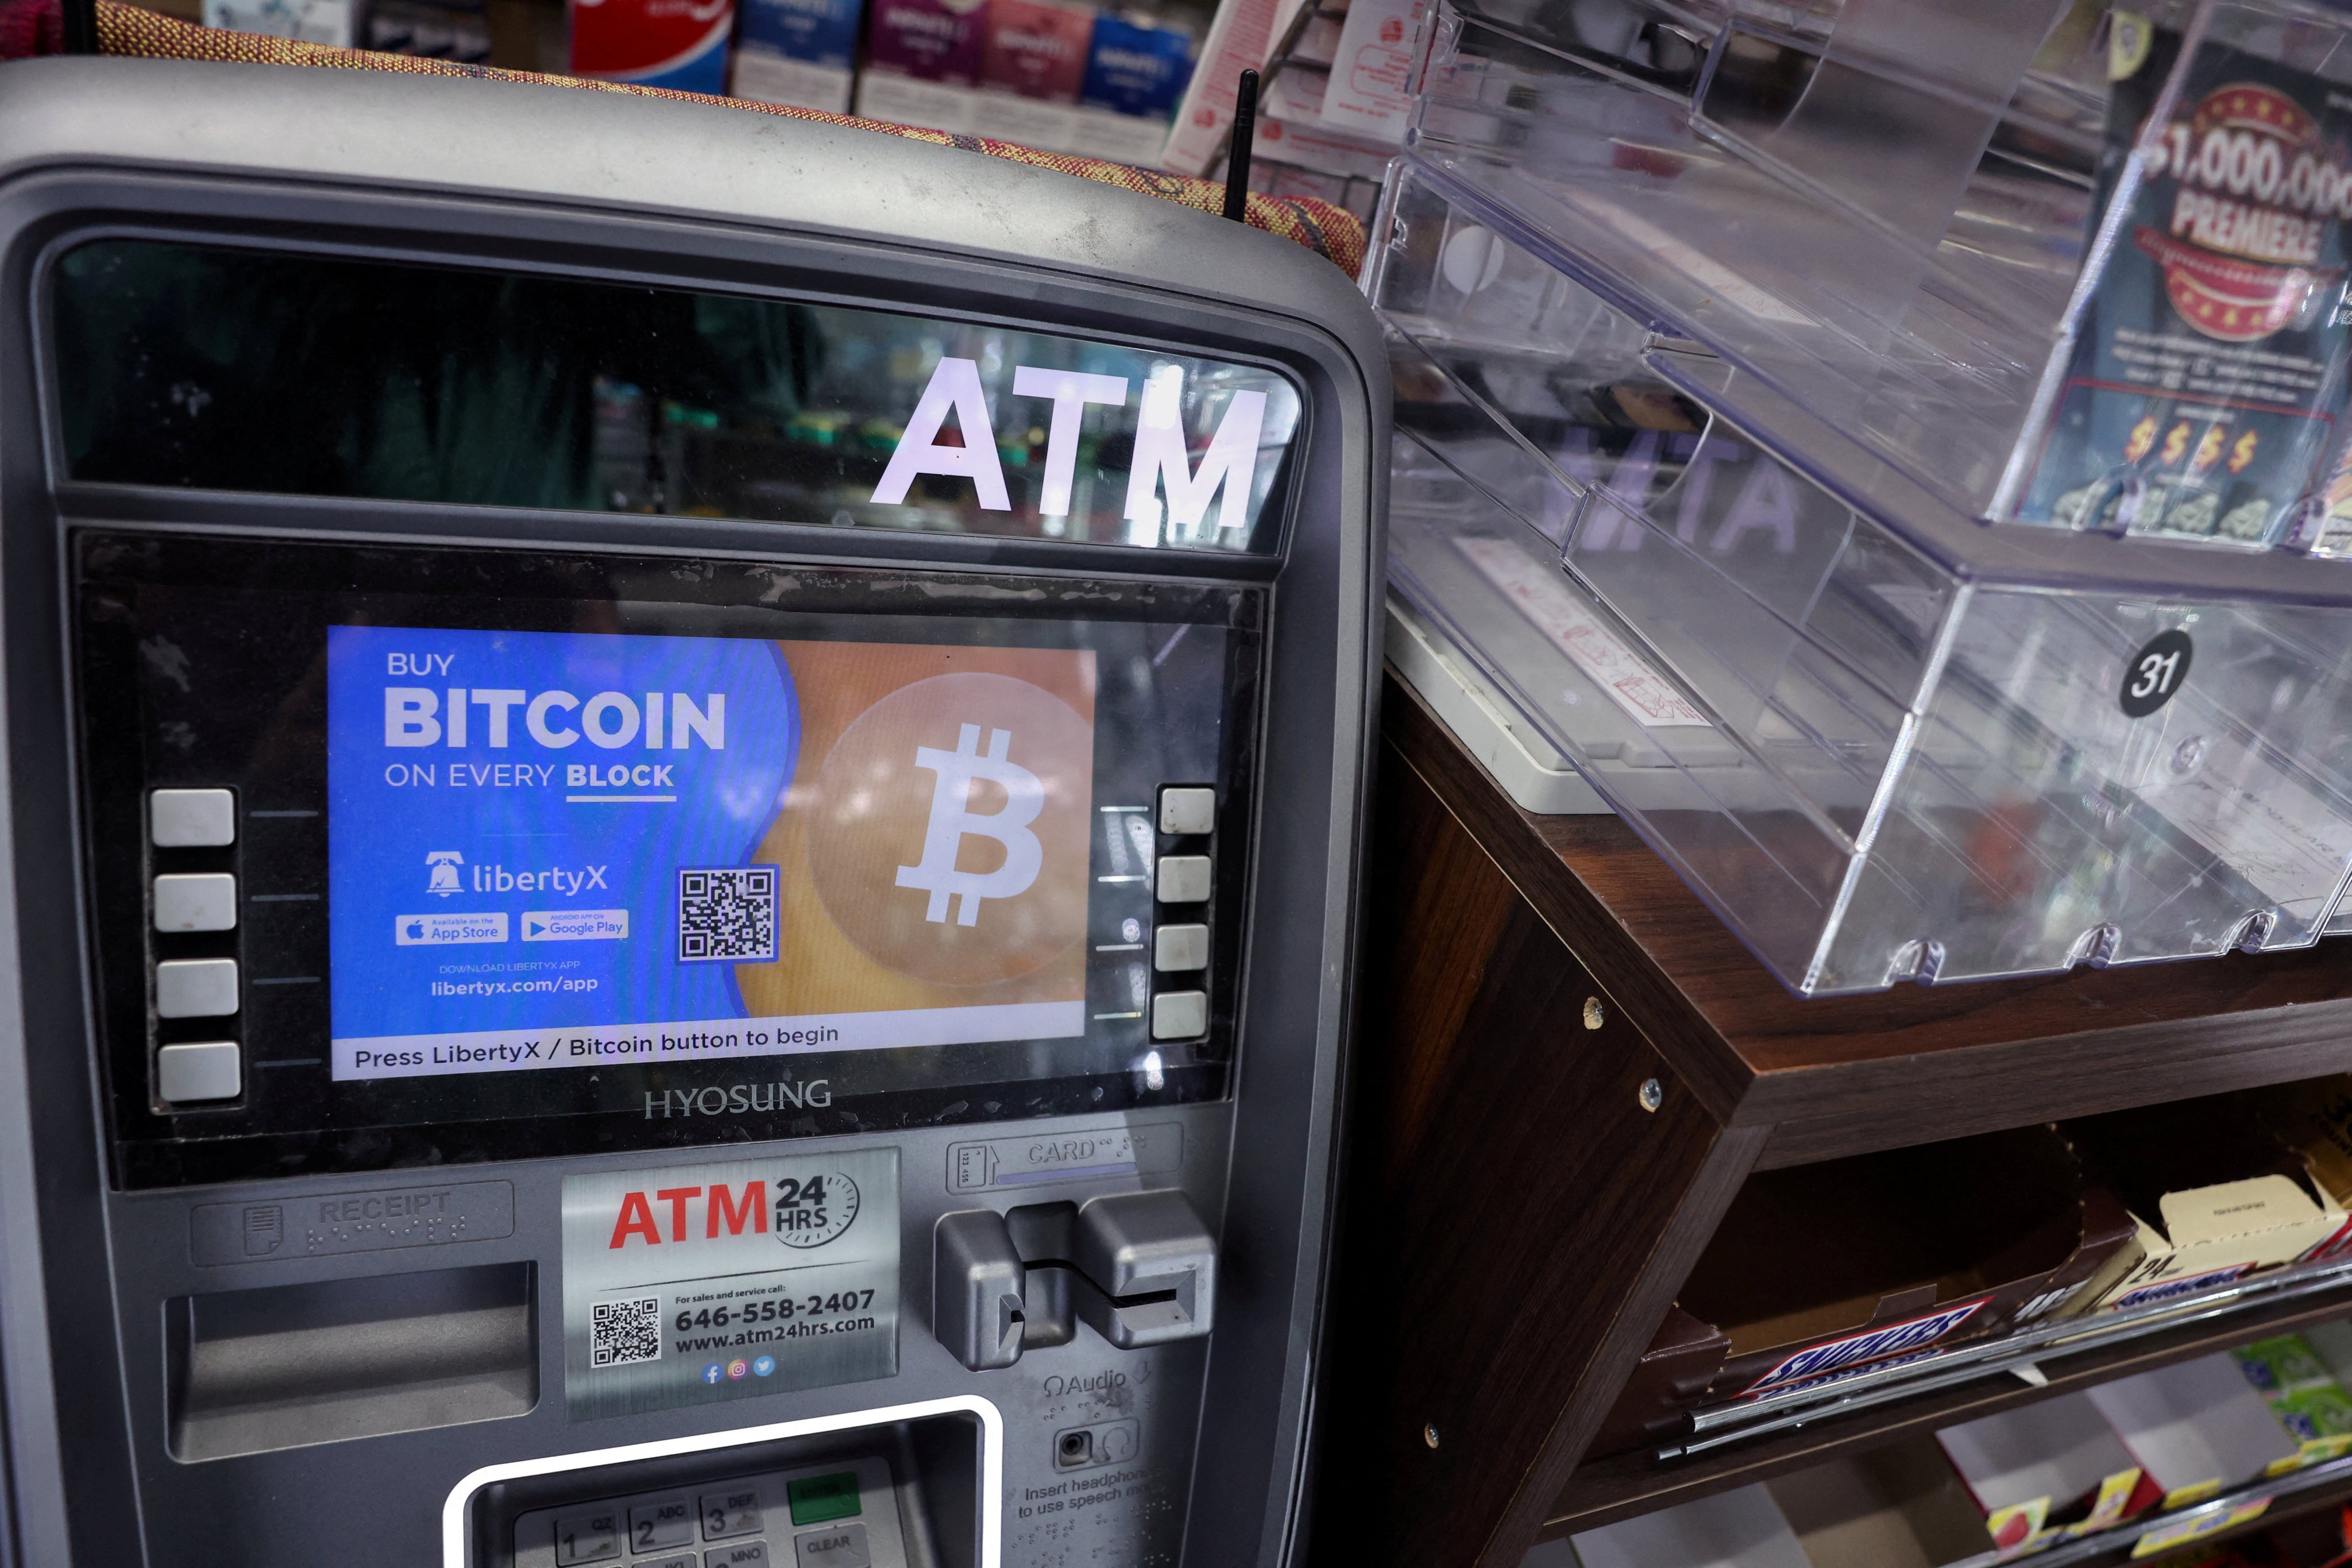 A bitcoin ATM sits in the corner of a store in New York on March 5. Bitcoin’s price has surged after US regulators allowed exchange-traded funds that track the spot price of the cryptocurrency, but there are also fears that increased mainstream appeal will bring calls for greater regulation. Photo: Reuters